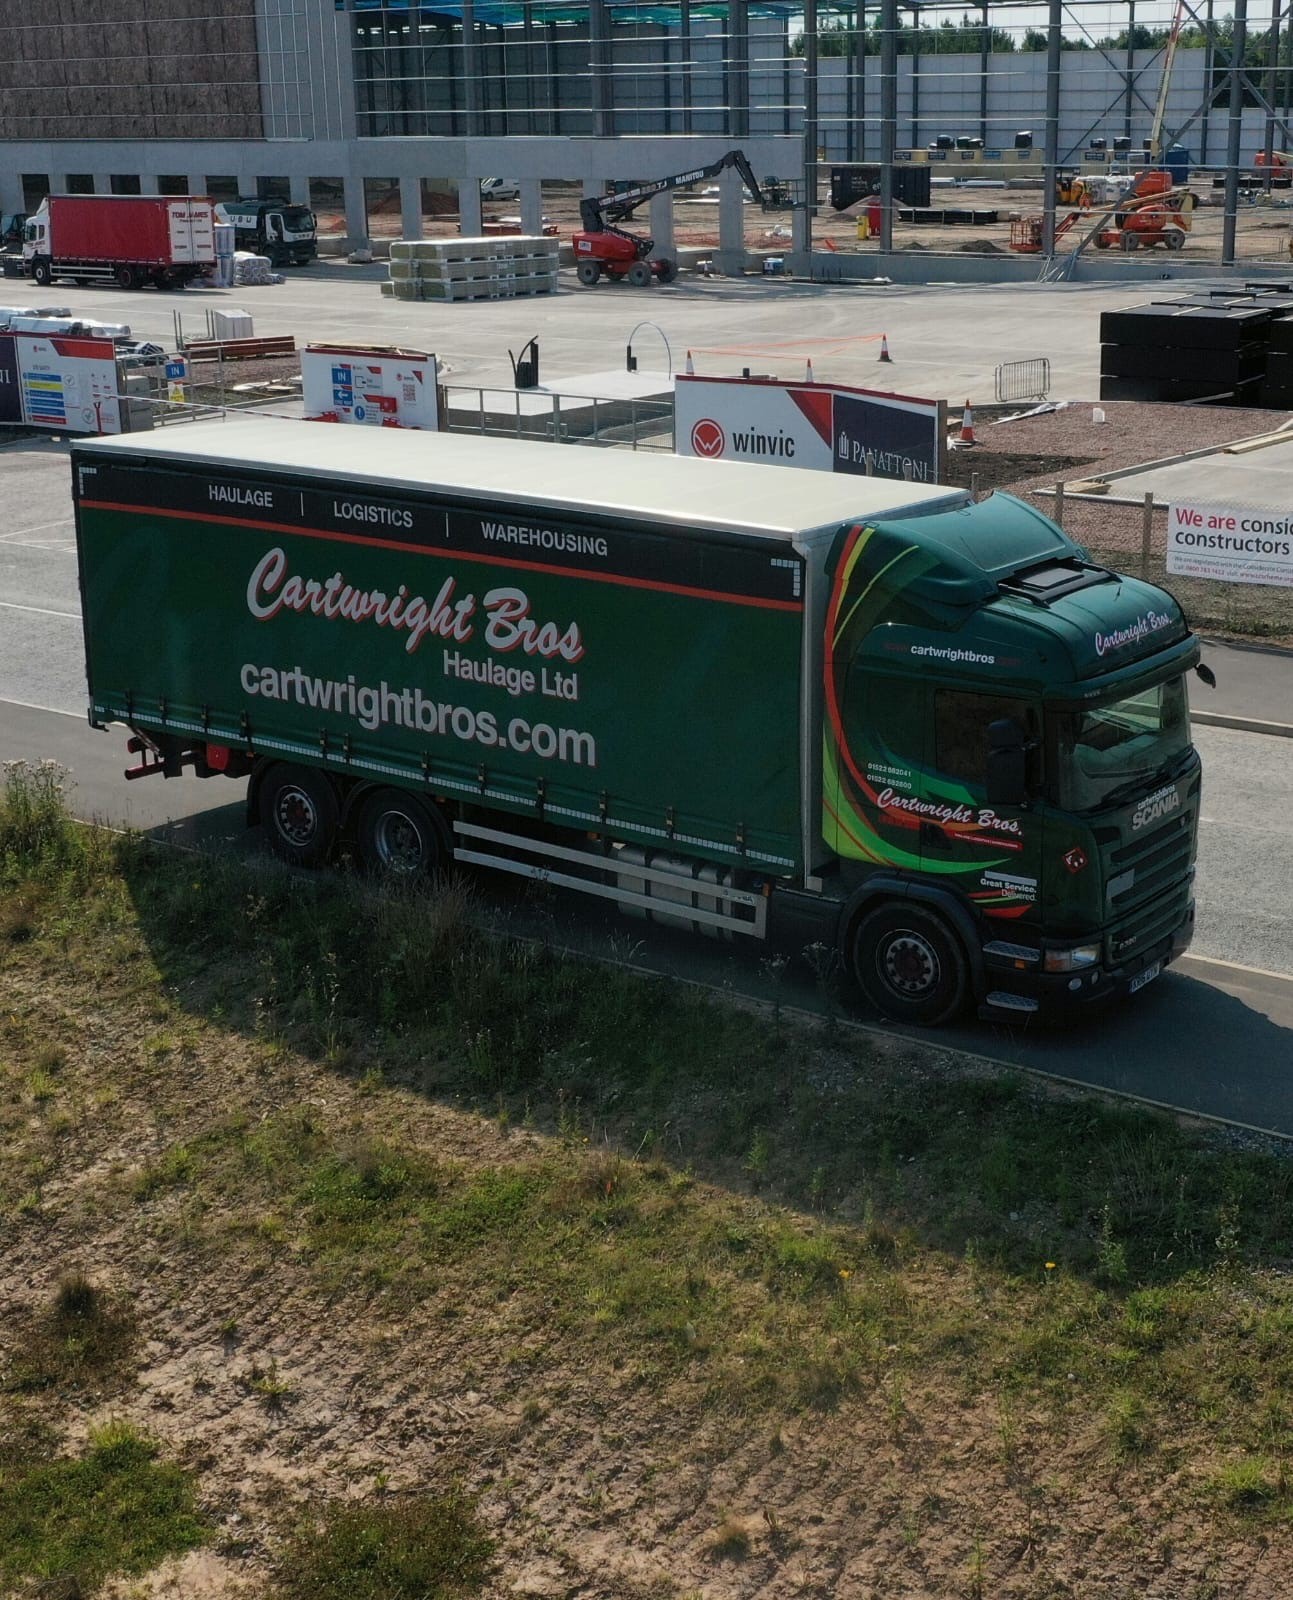 Cartwright Bros: Celebrate 80 Years of Excellence